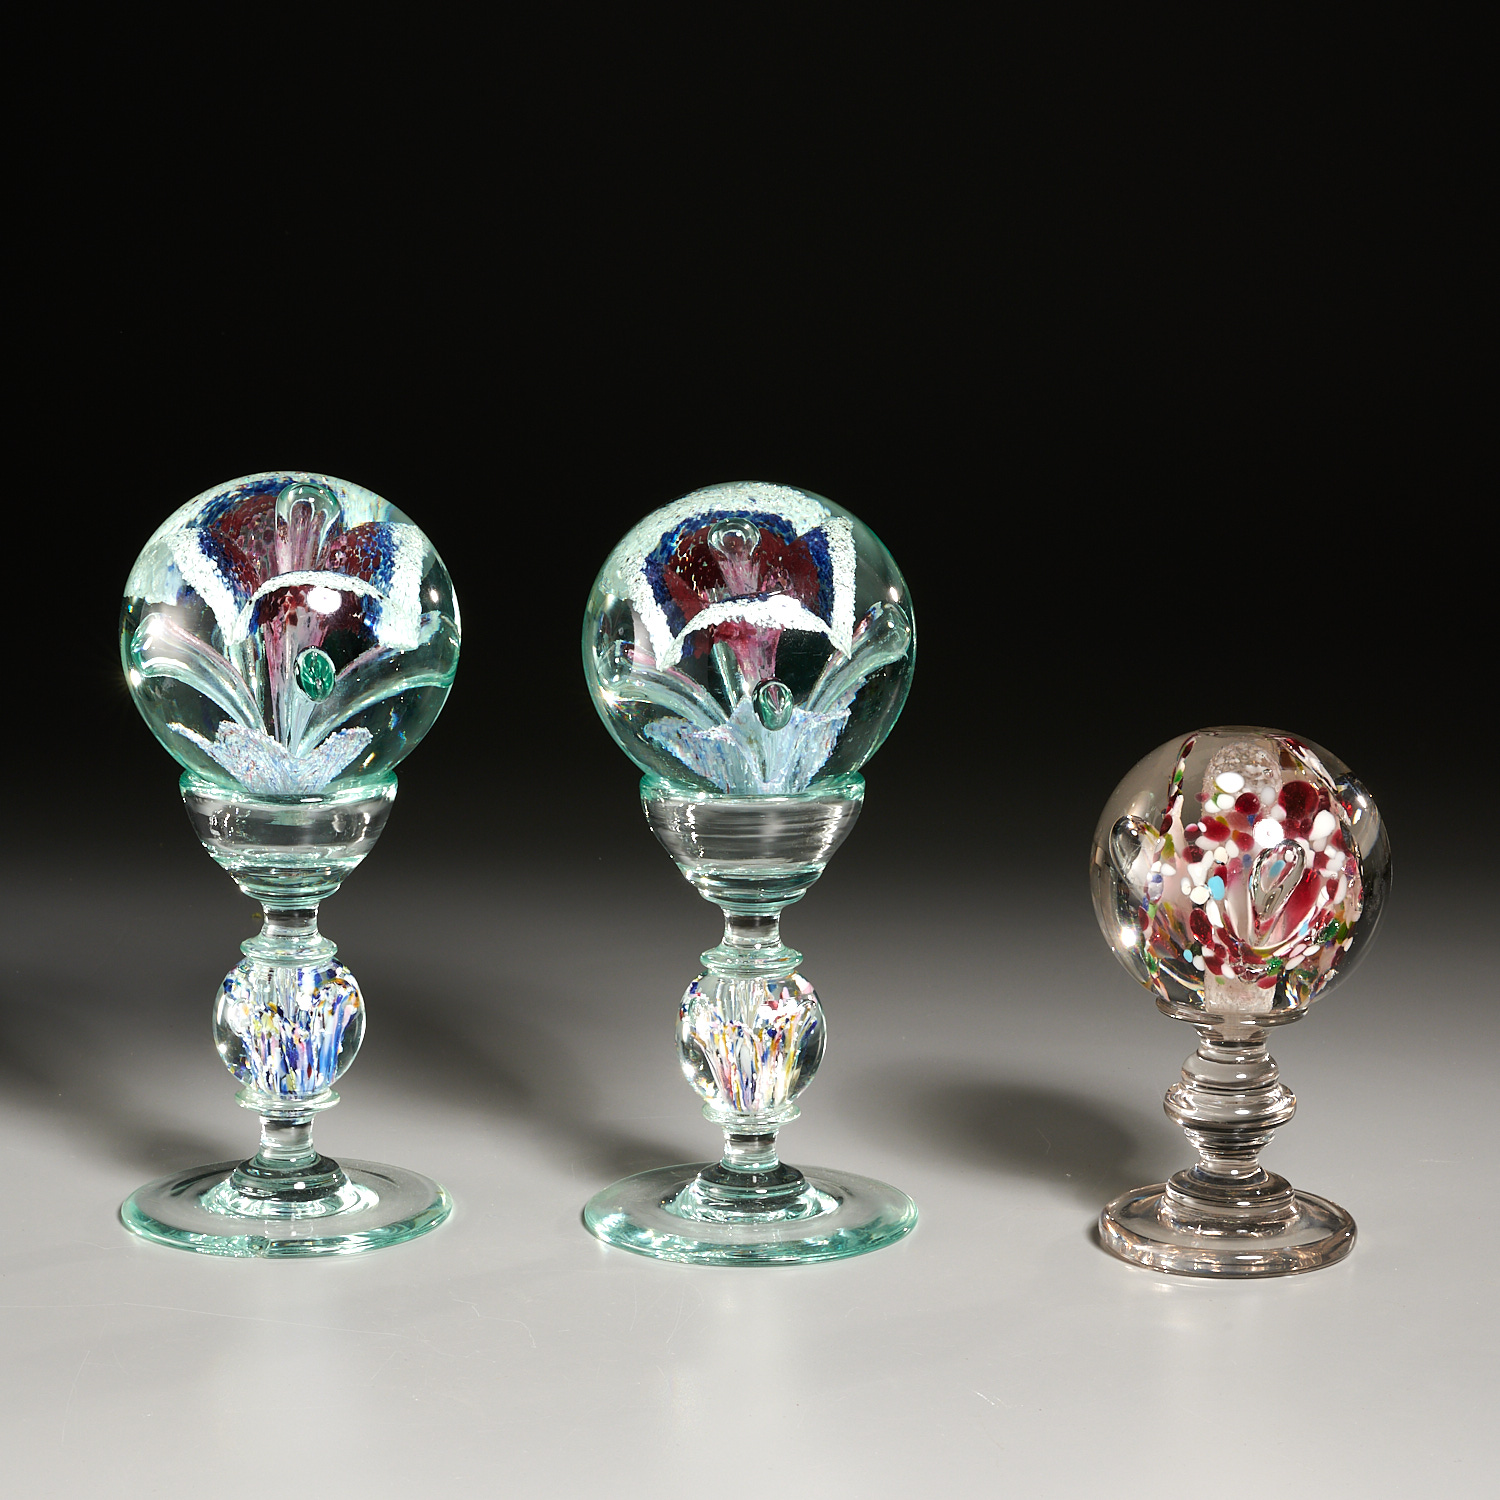  3 PAPERWEIGHT GLASS WIG STANDS 36244d